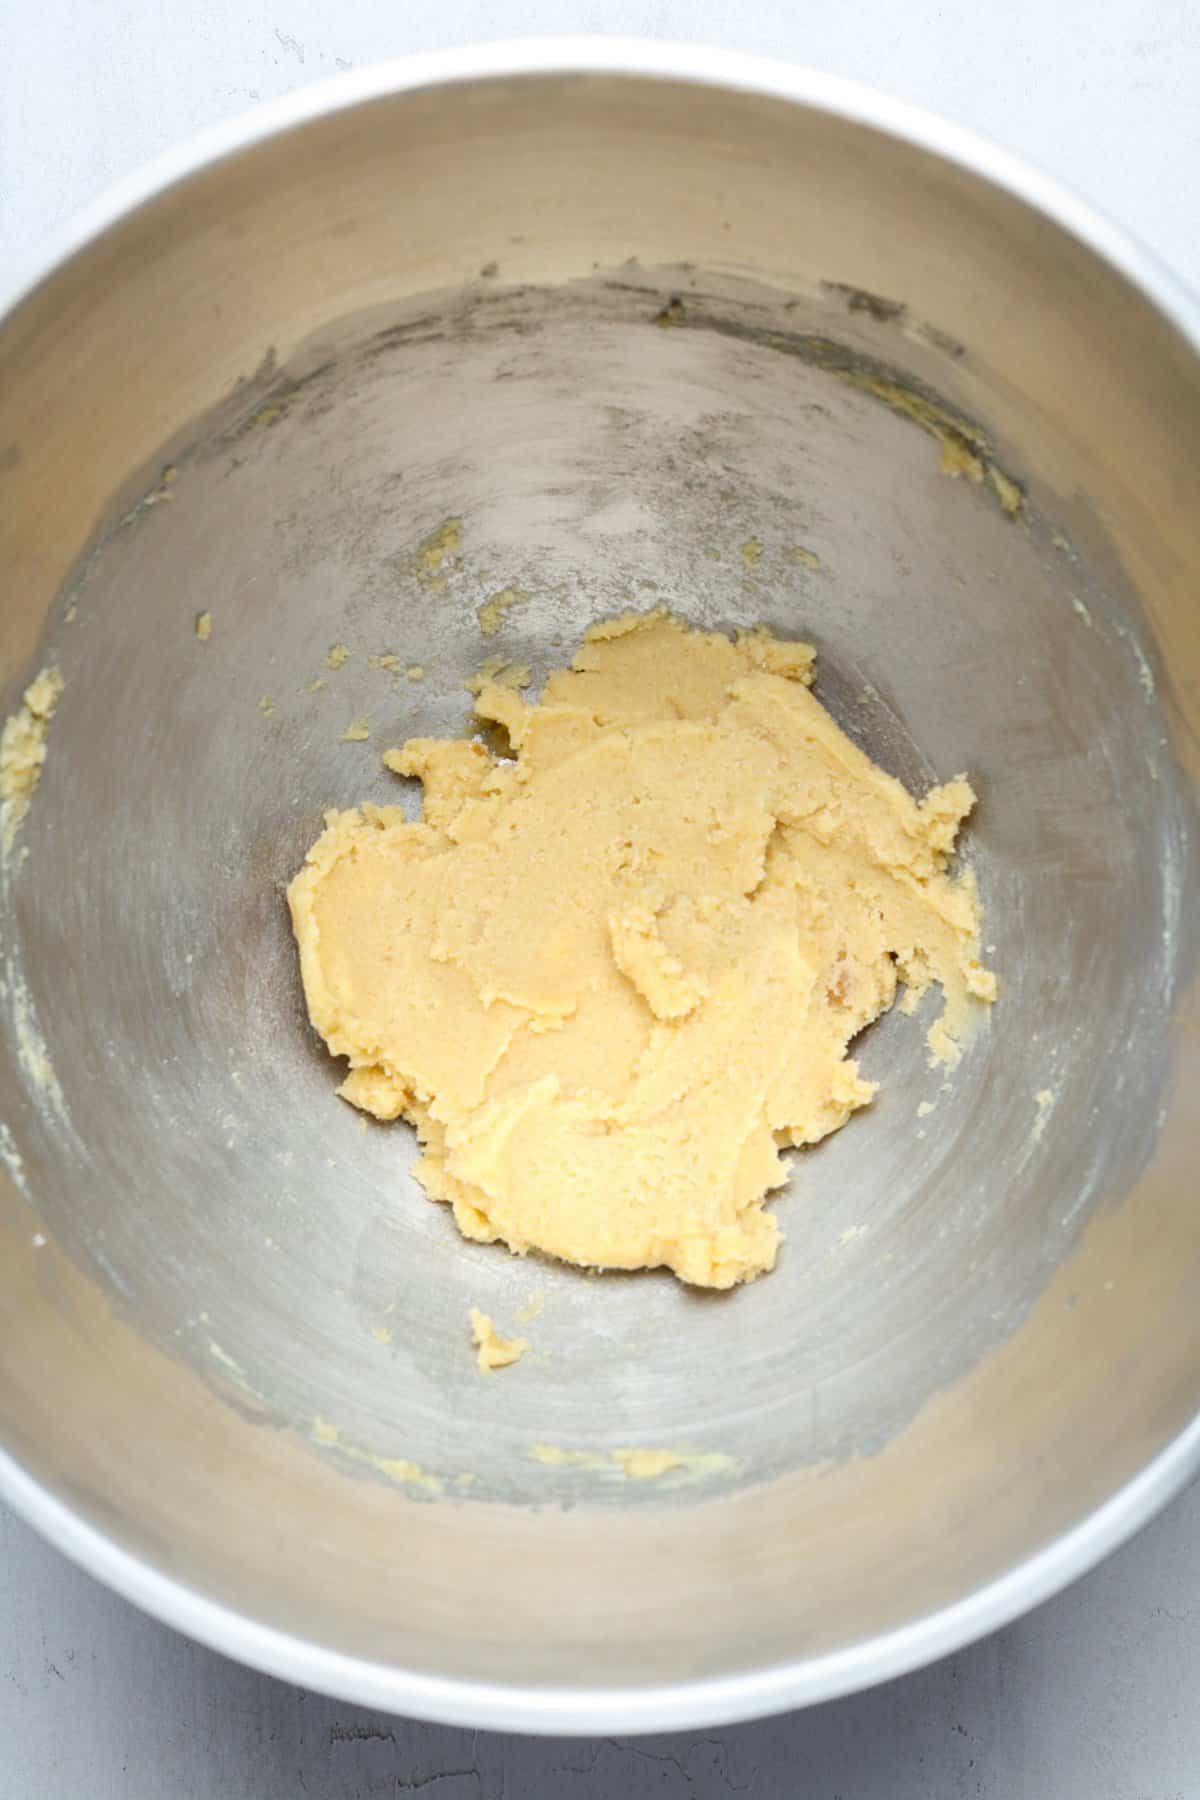 Creamy butter and sugars in bowl